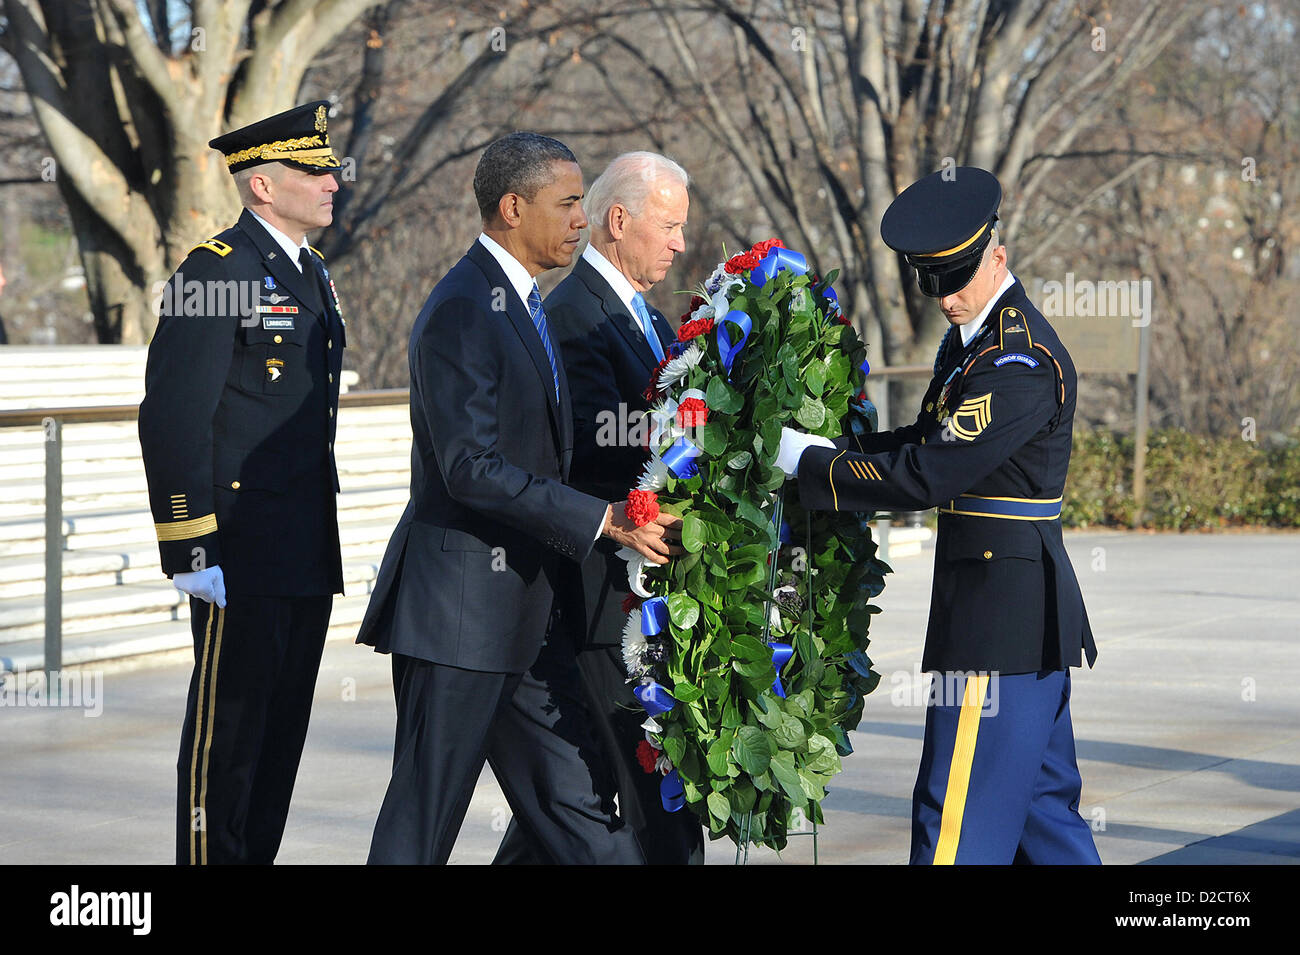 US President Barack Obama and Vice President Joe Biden lay a wreath at the Tomb of the Unknowns January 20, 2013 at Arlington National Cemetery, VA. It is a tradition for the President to honor the Unknown Soldiers on Inauguration Day. Stock Photo